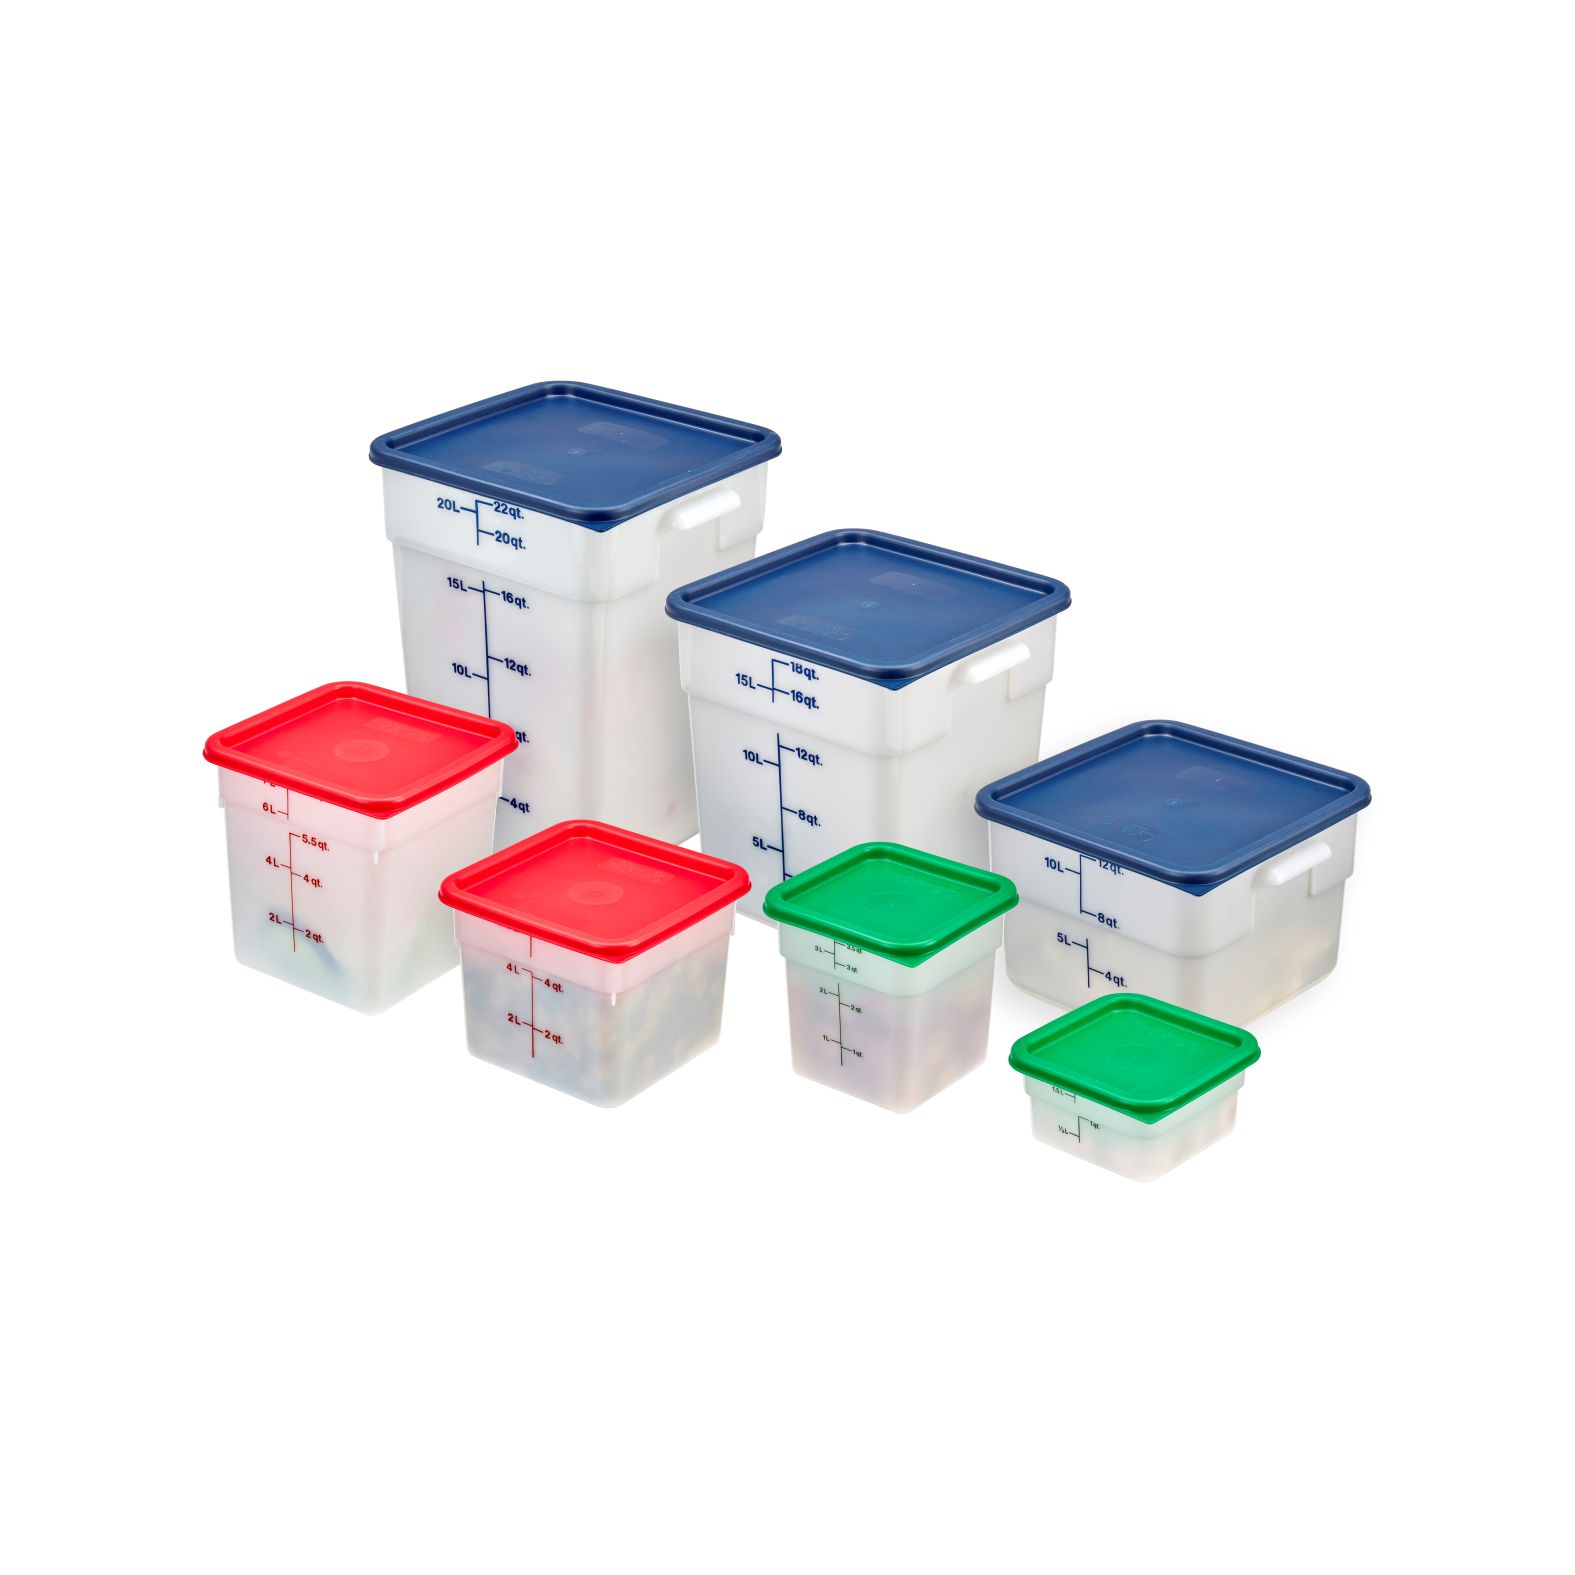 Food containers (52)